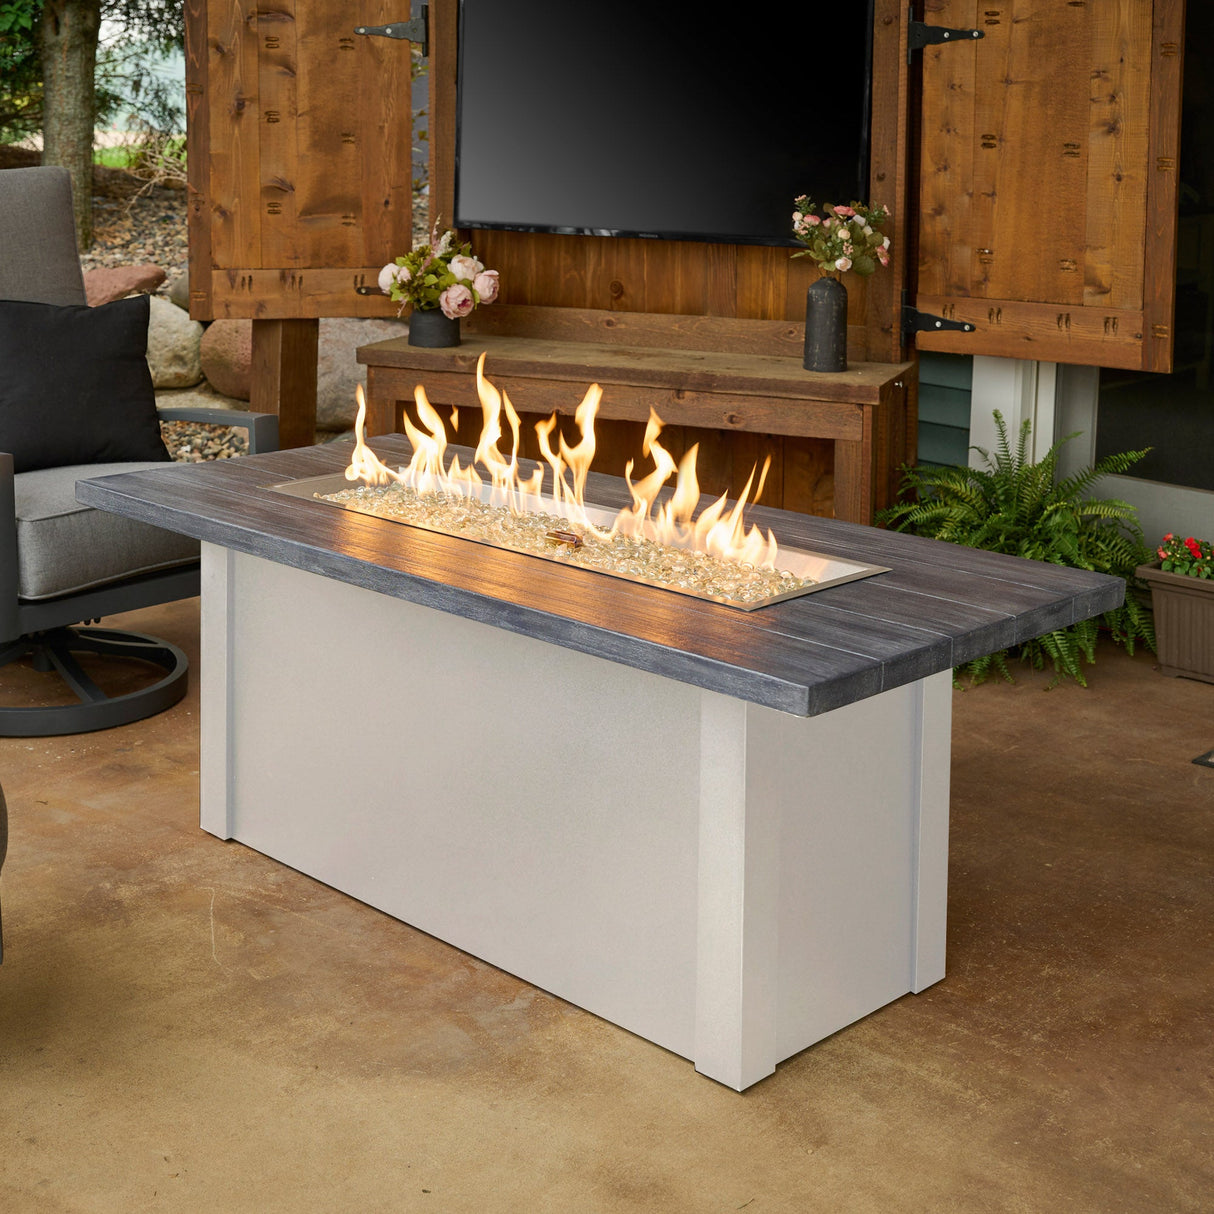 Havenwood Linear Gas Fire Pit Table with a Carbon Grey top and White base next to an outdoor patio setup